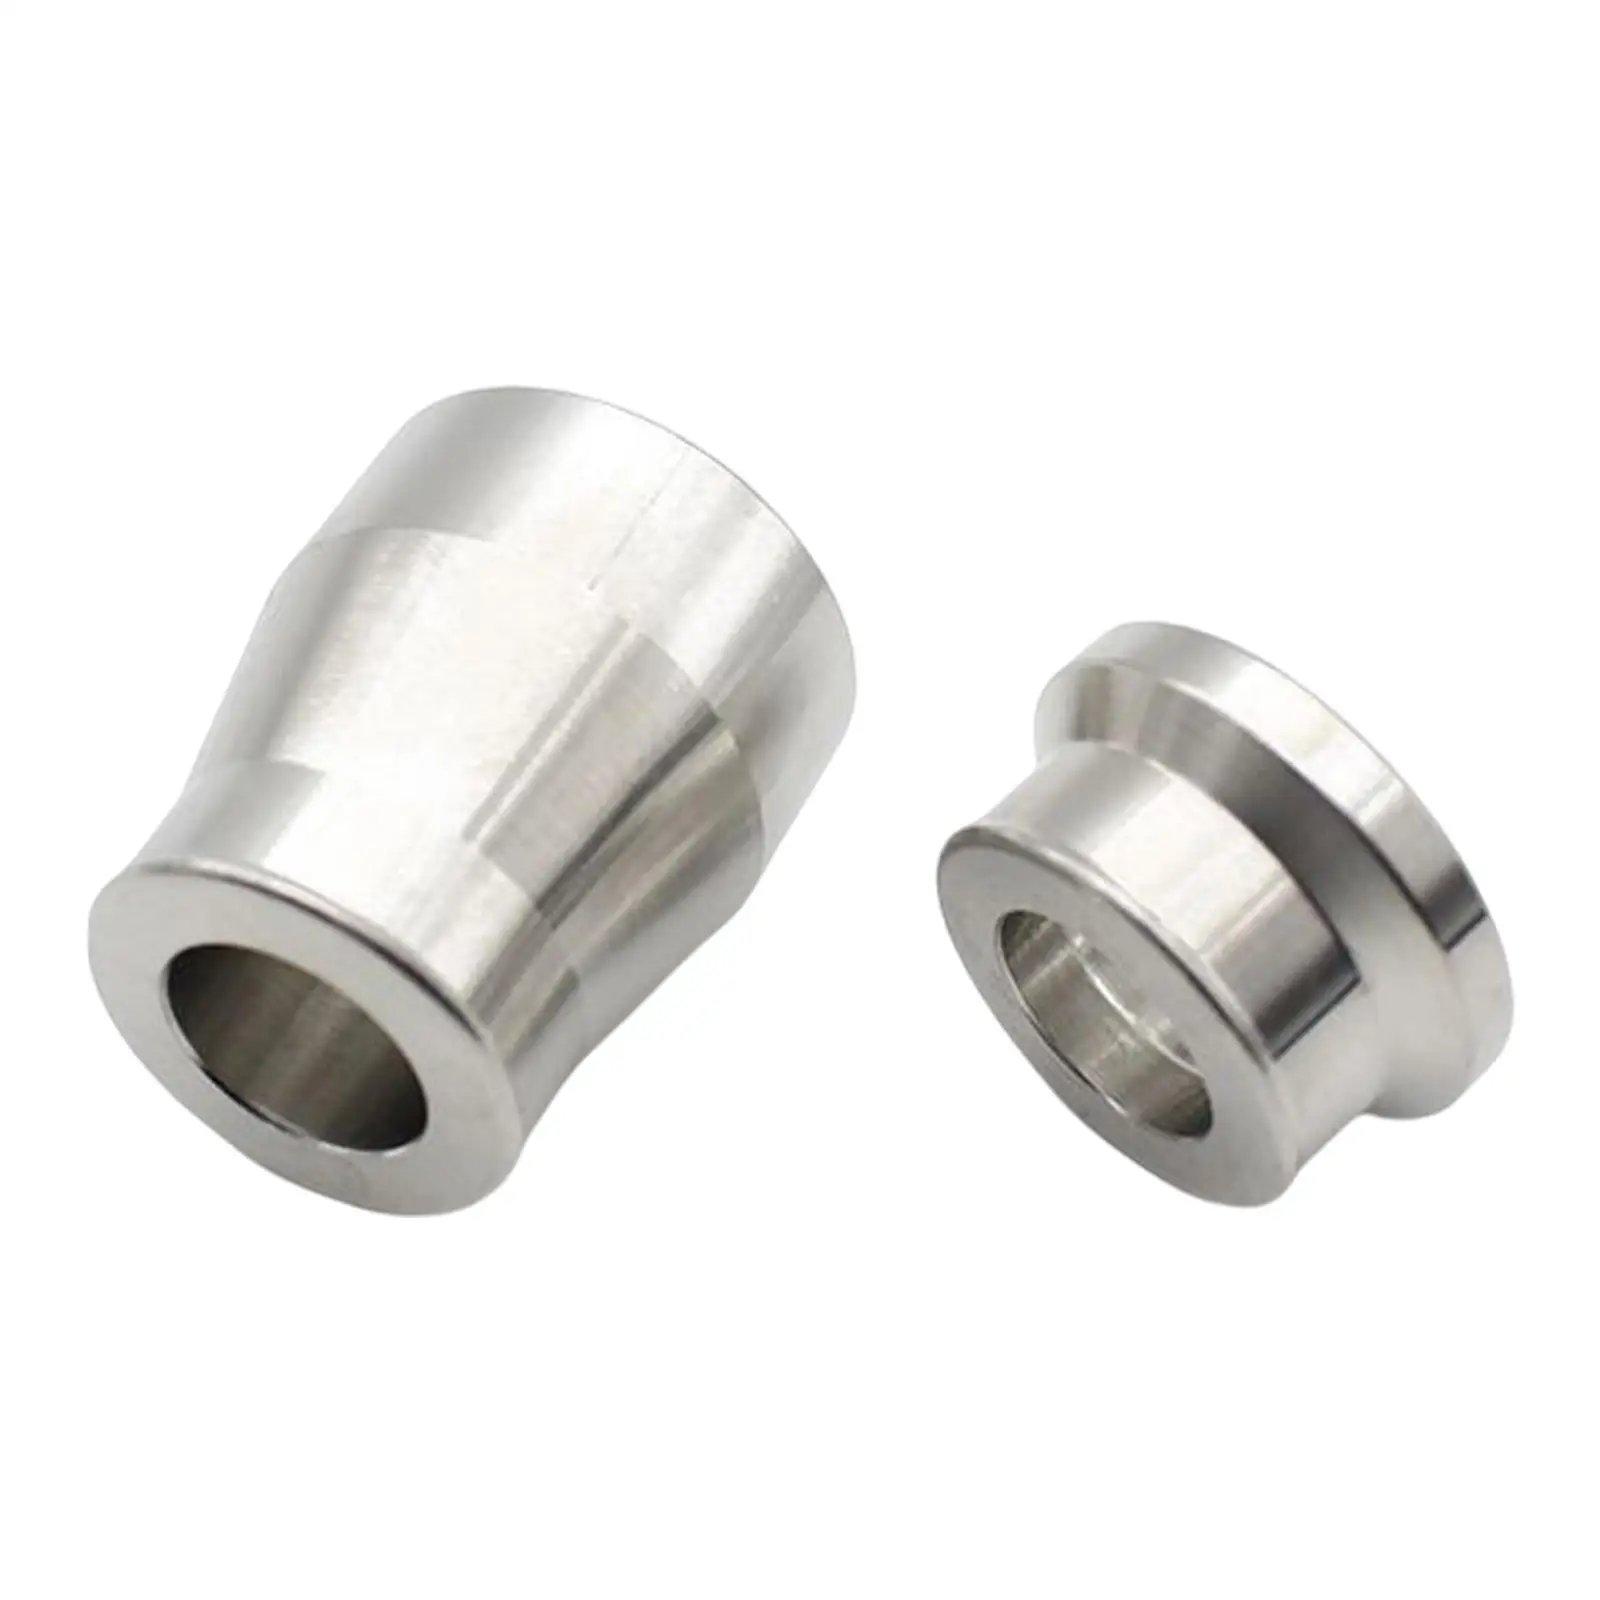 Modified Front Wheel Bushings Replacement Accessories for Kymco Krv180